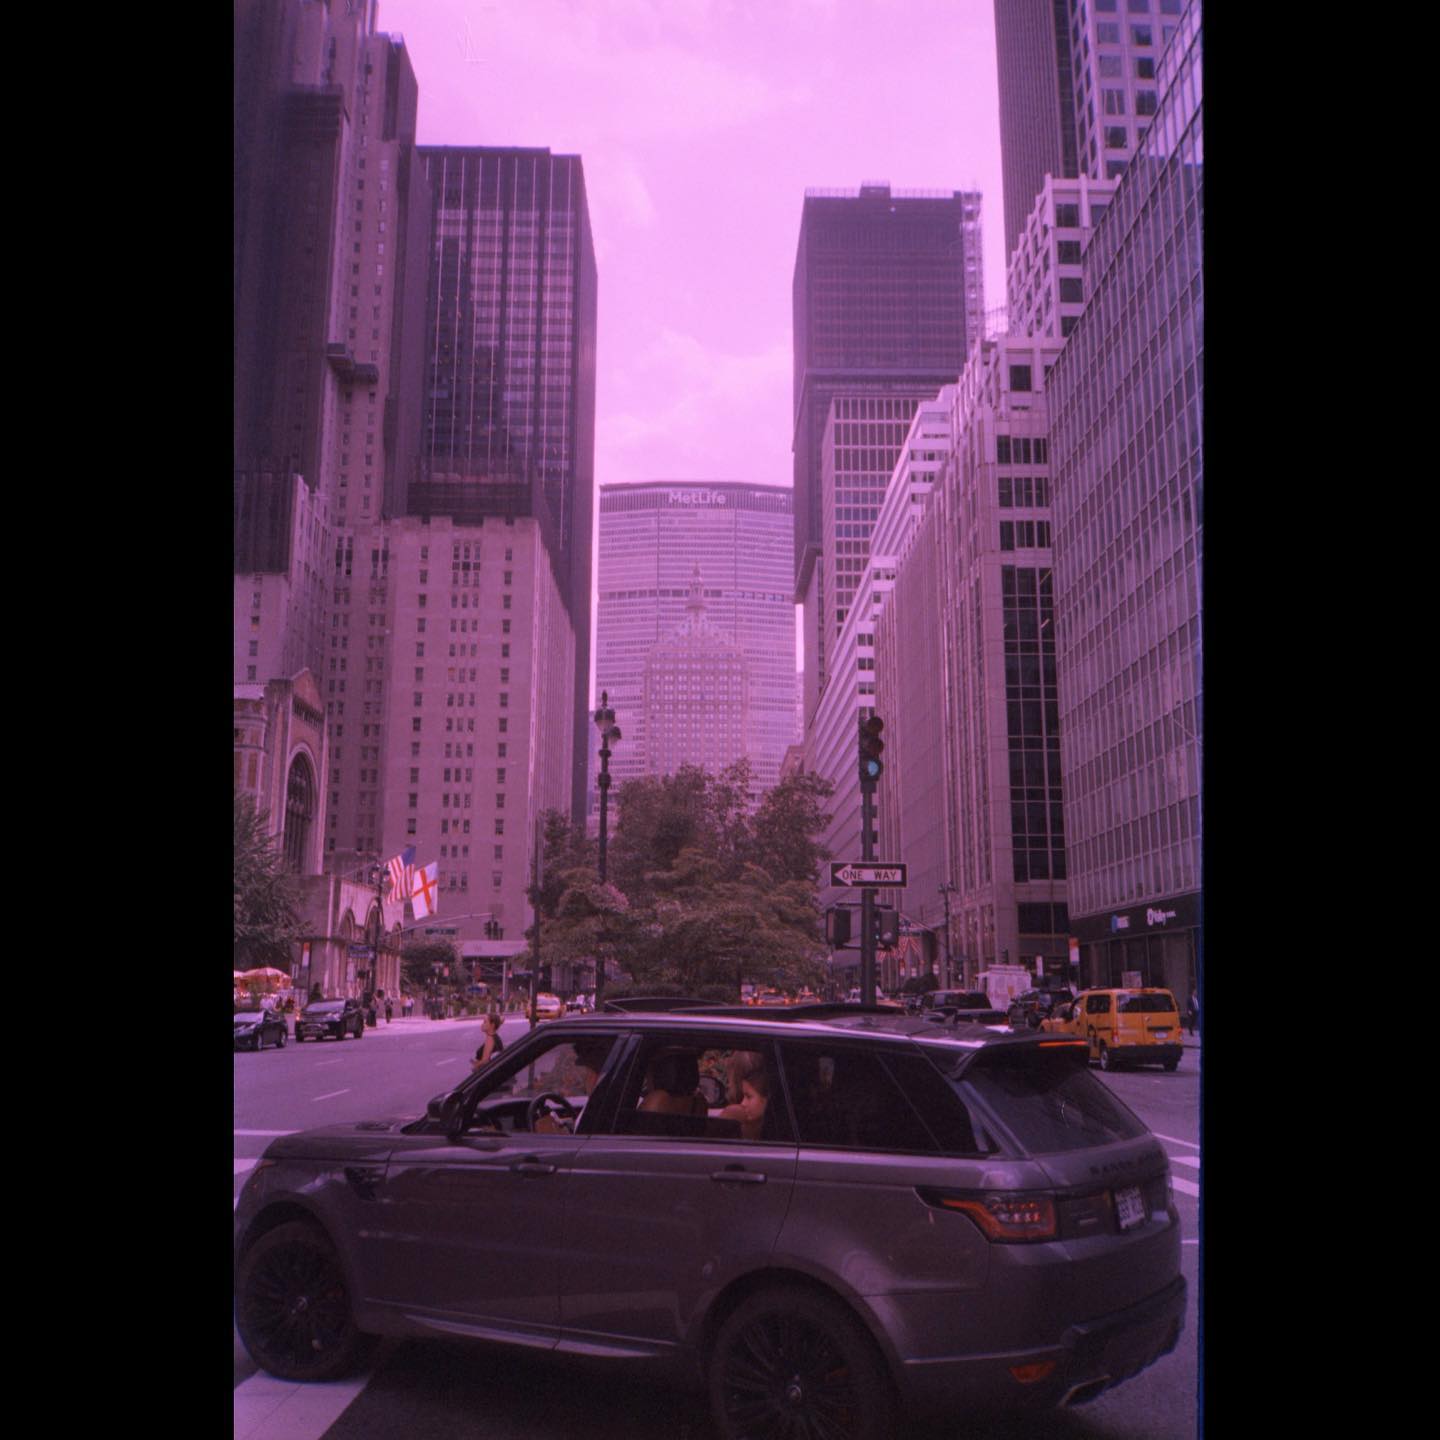 I still think of that tall building in the center as the Pan Am Building. 
#film #expiredfilm #olympusxa #mitsubishimxiii100 #filmphotography #staybrokeshootfilm